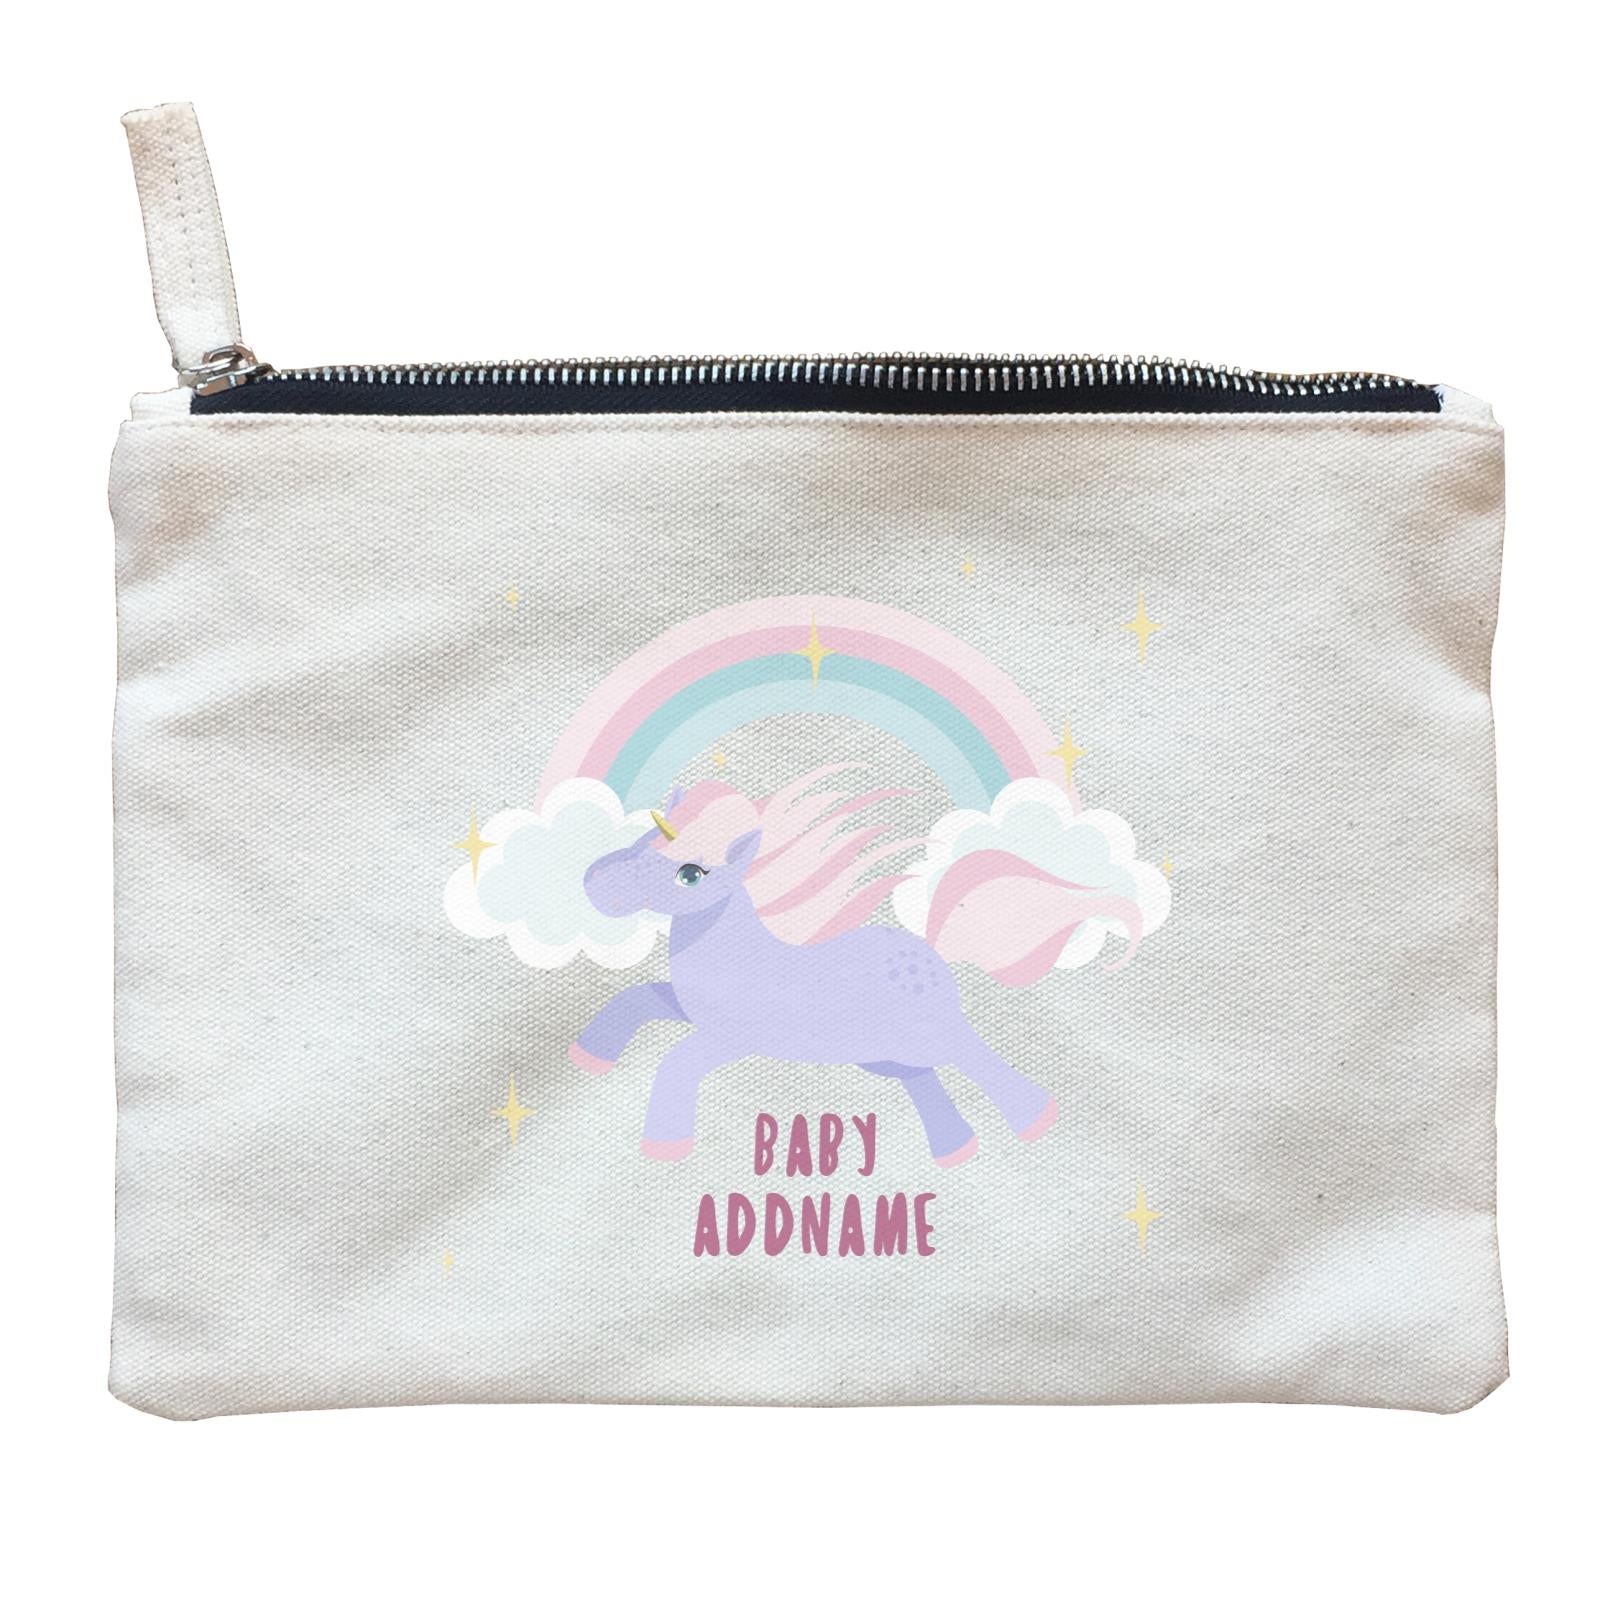 Purple Unicorn Galloping with Rainbow and Baby Addname Zipper Pouch